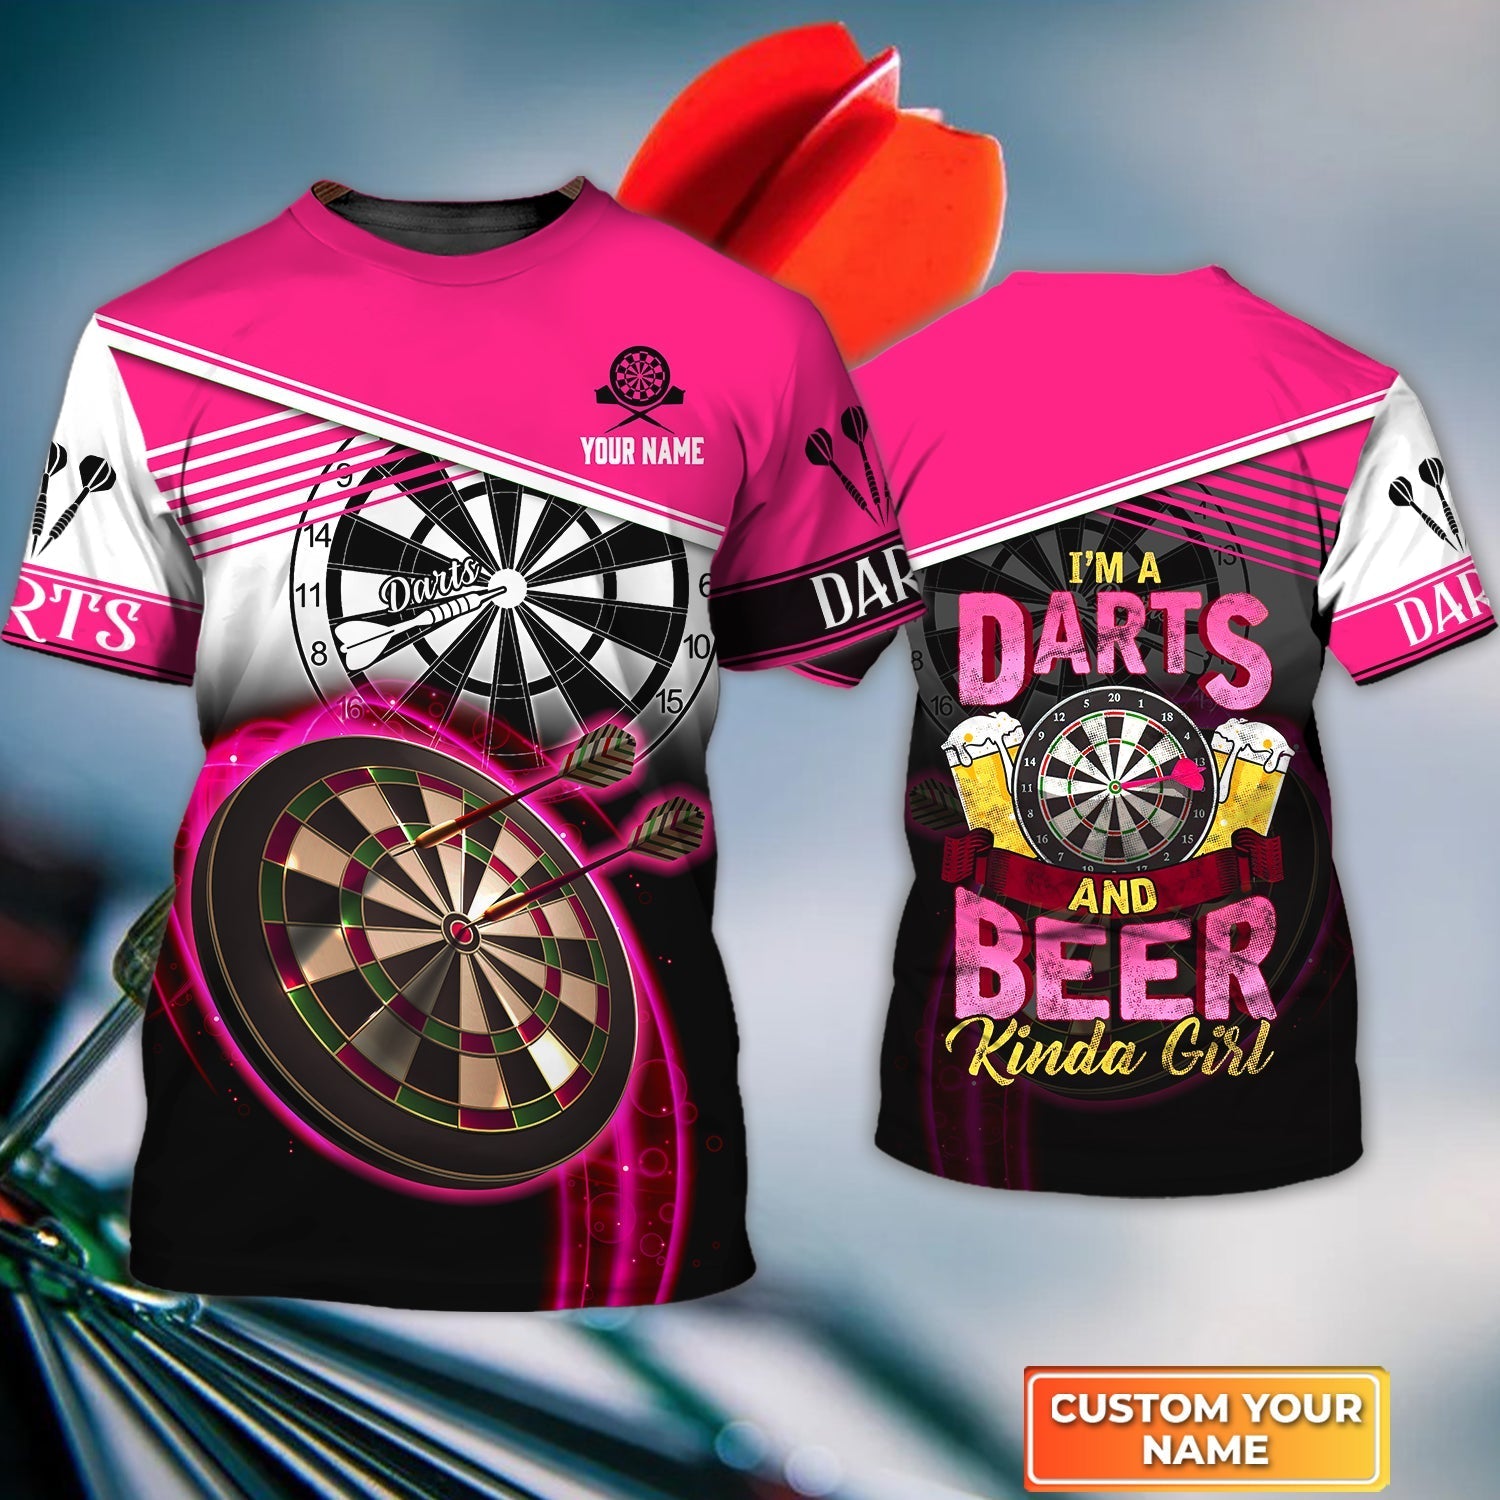 im a darts and beer kinda girl personalized name 3d tshirt for darts player dt158 bdnei